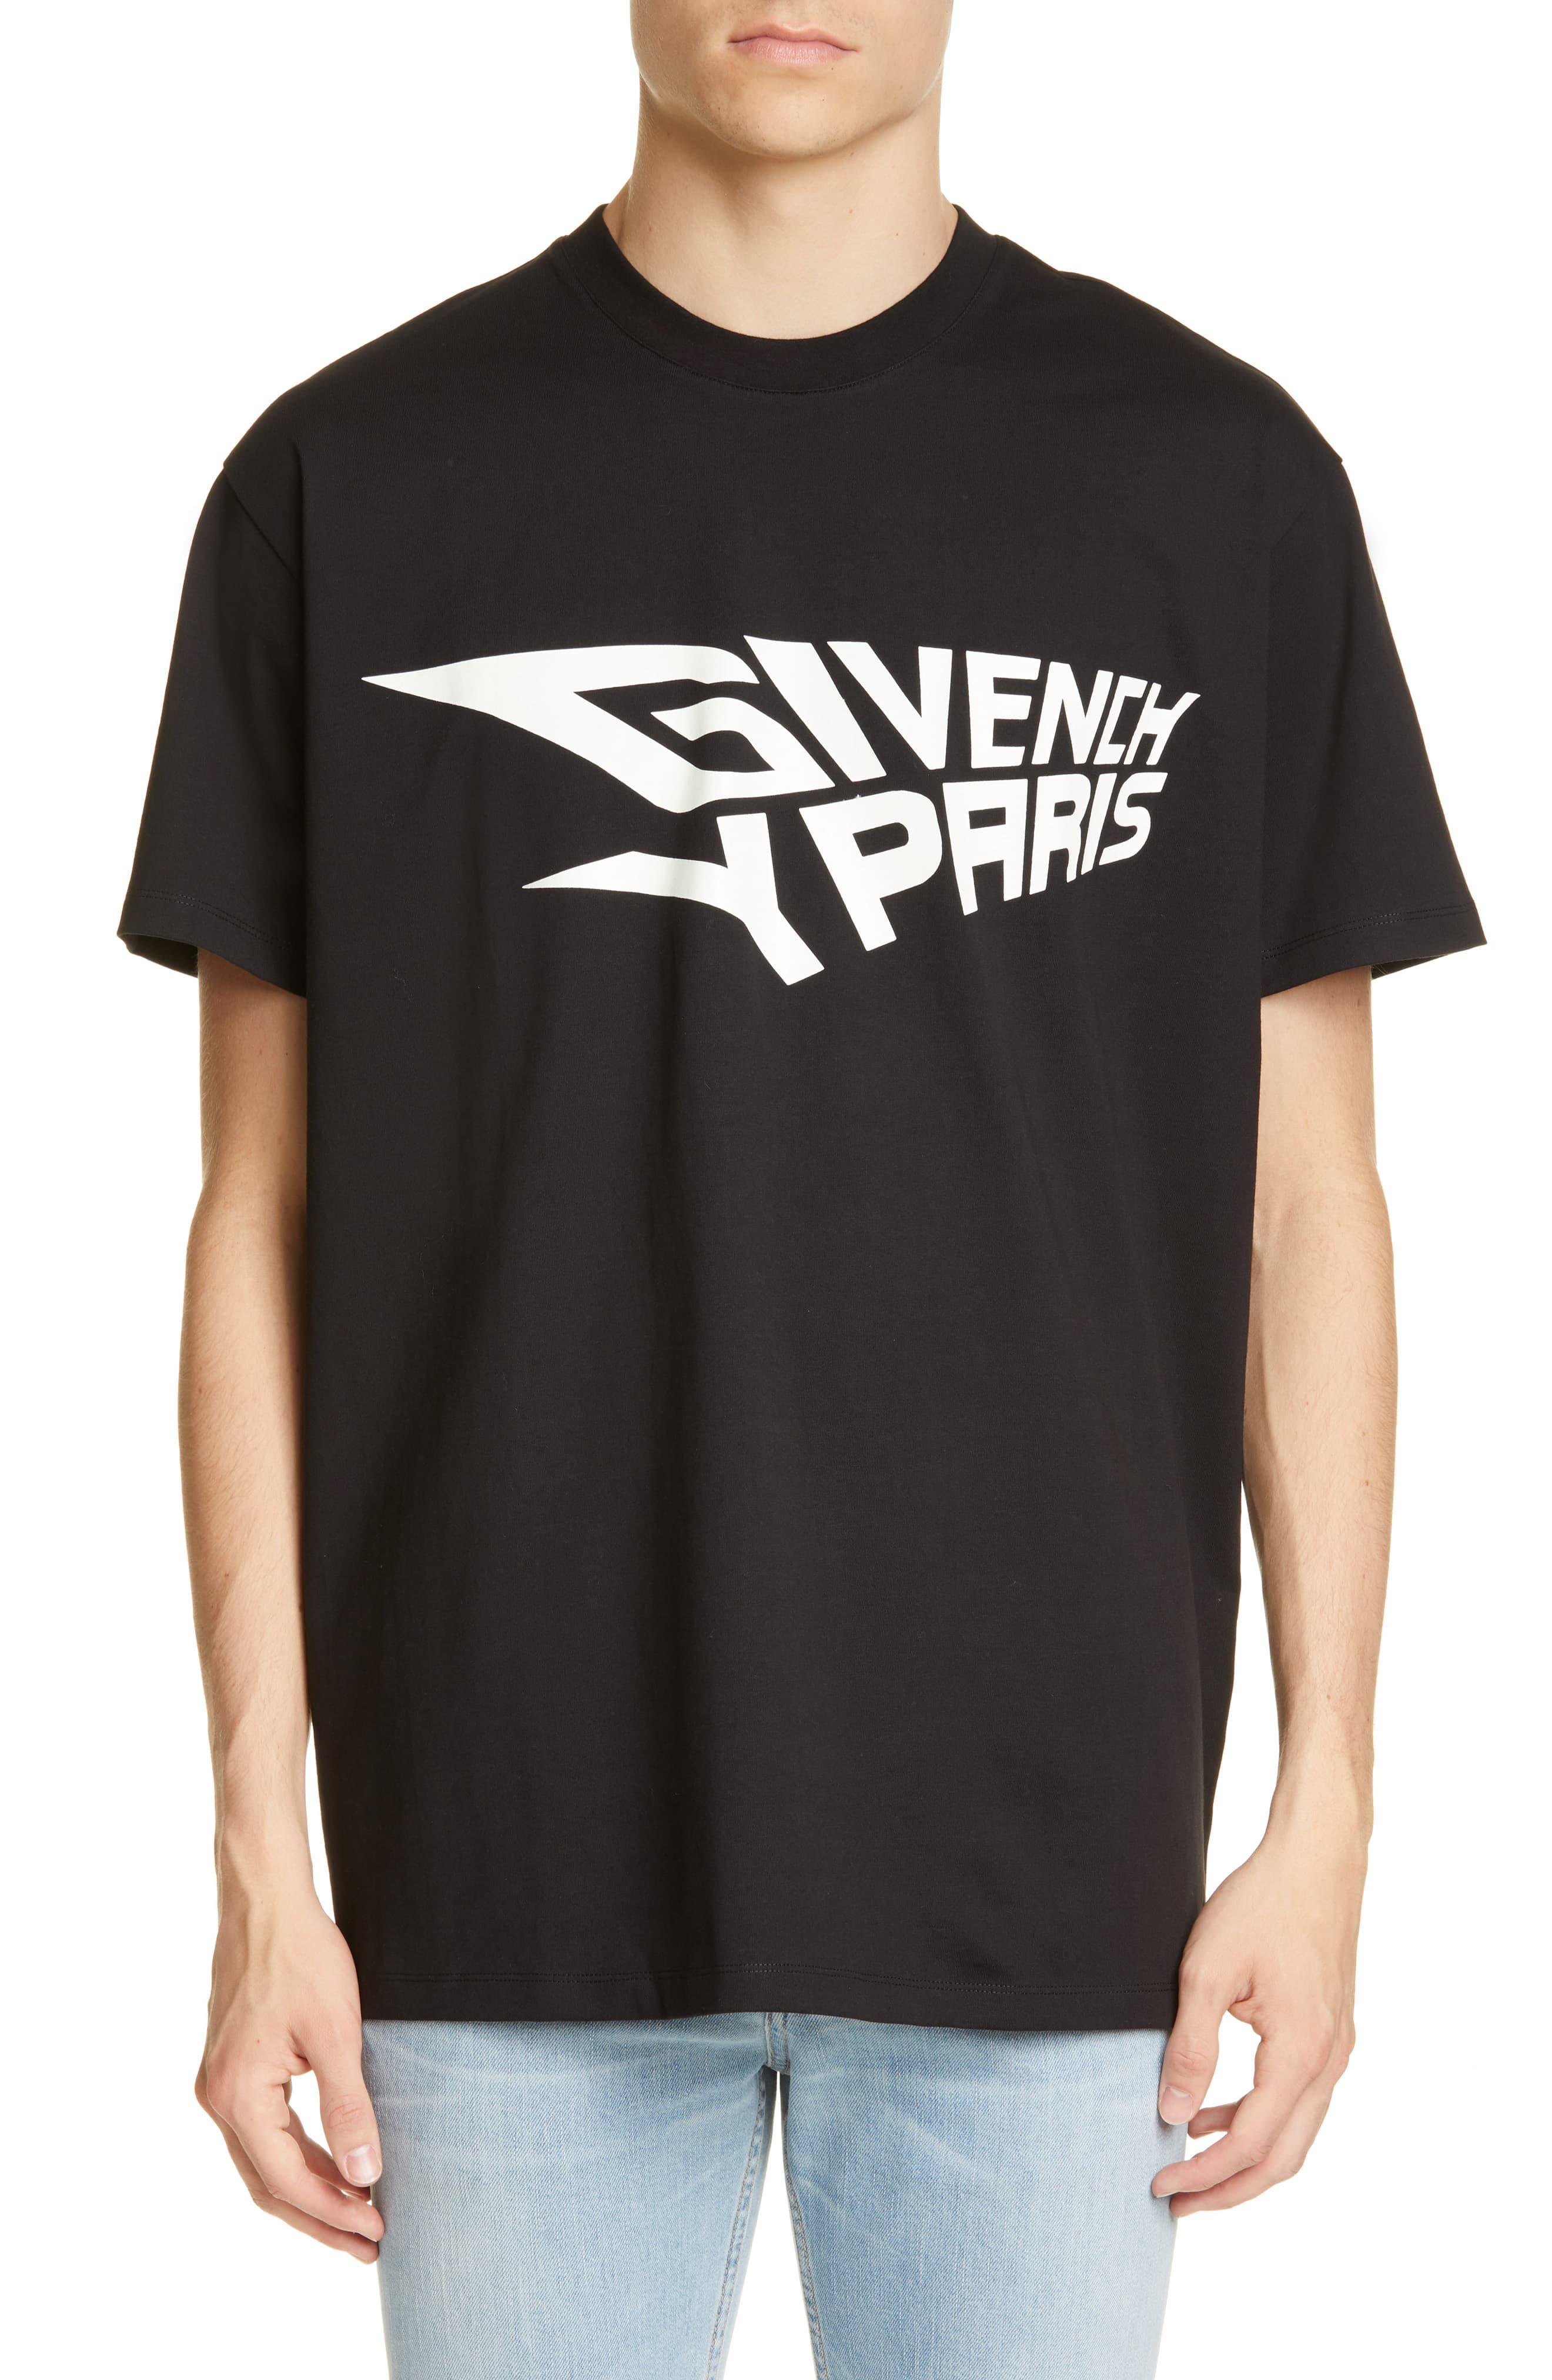 Givenchy Cotton Logo Printed T-shirt in Black for Men - Save 43% - Lyst